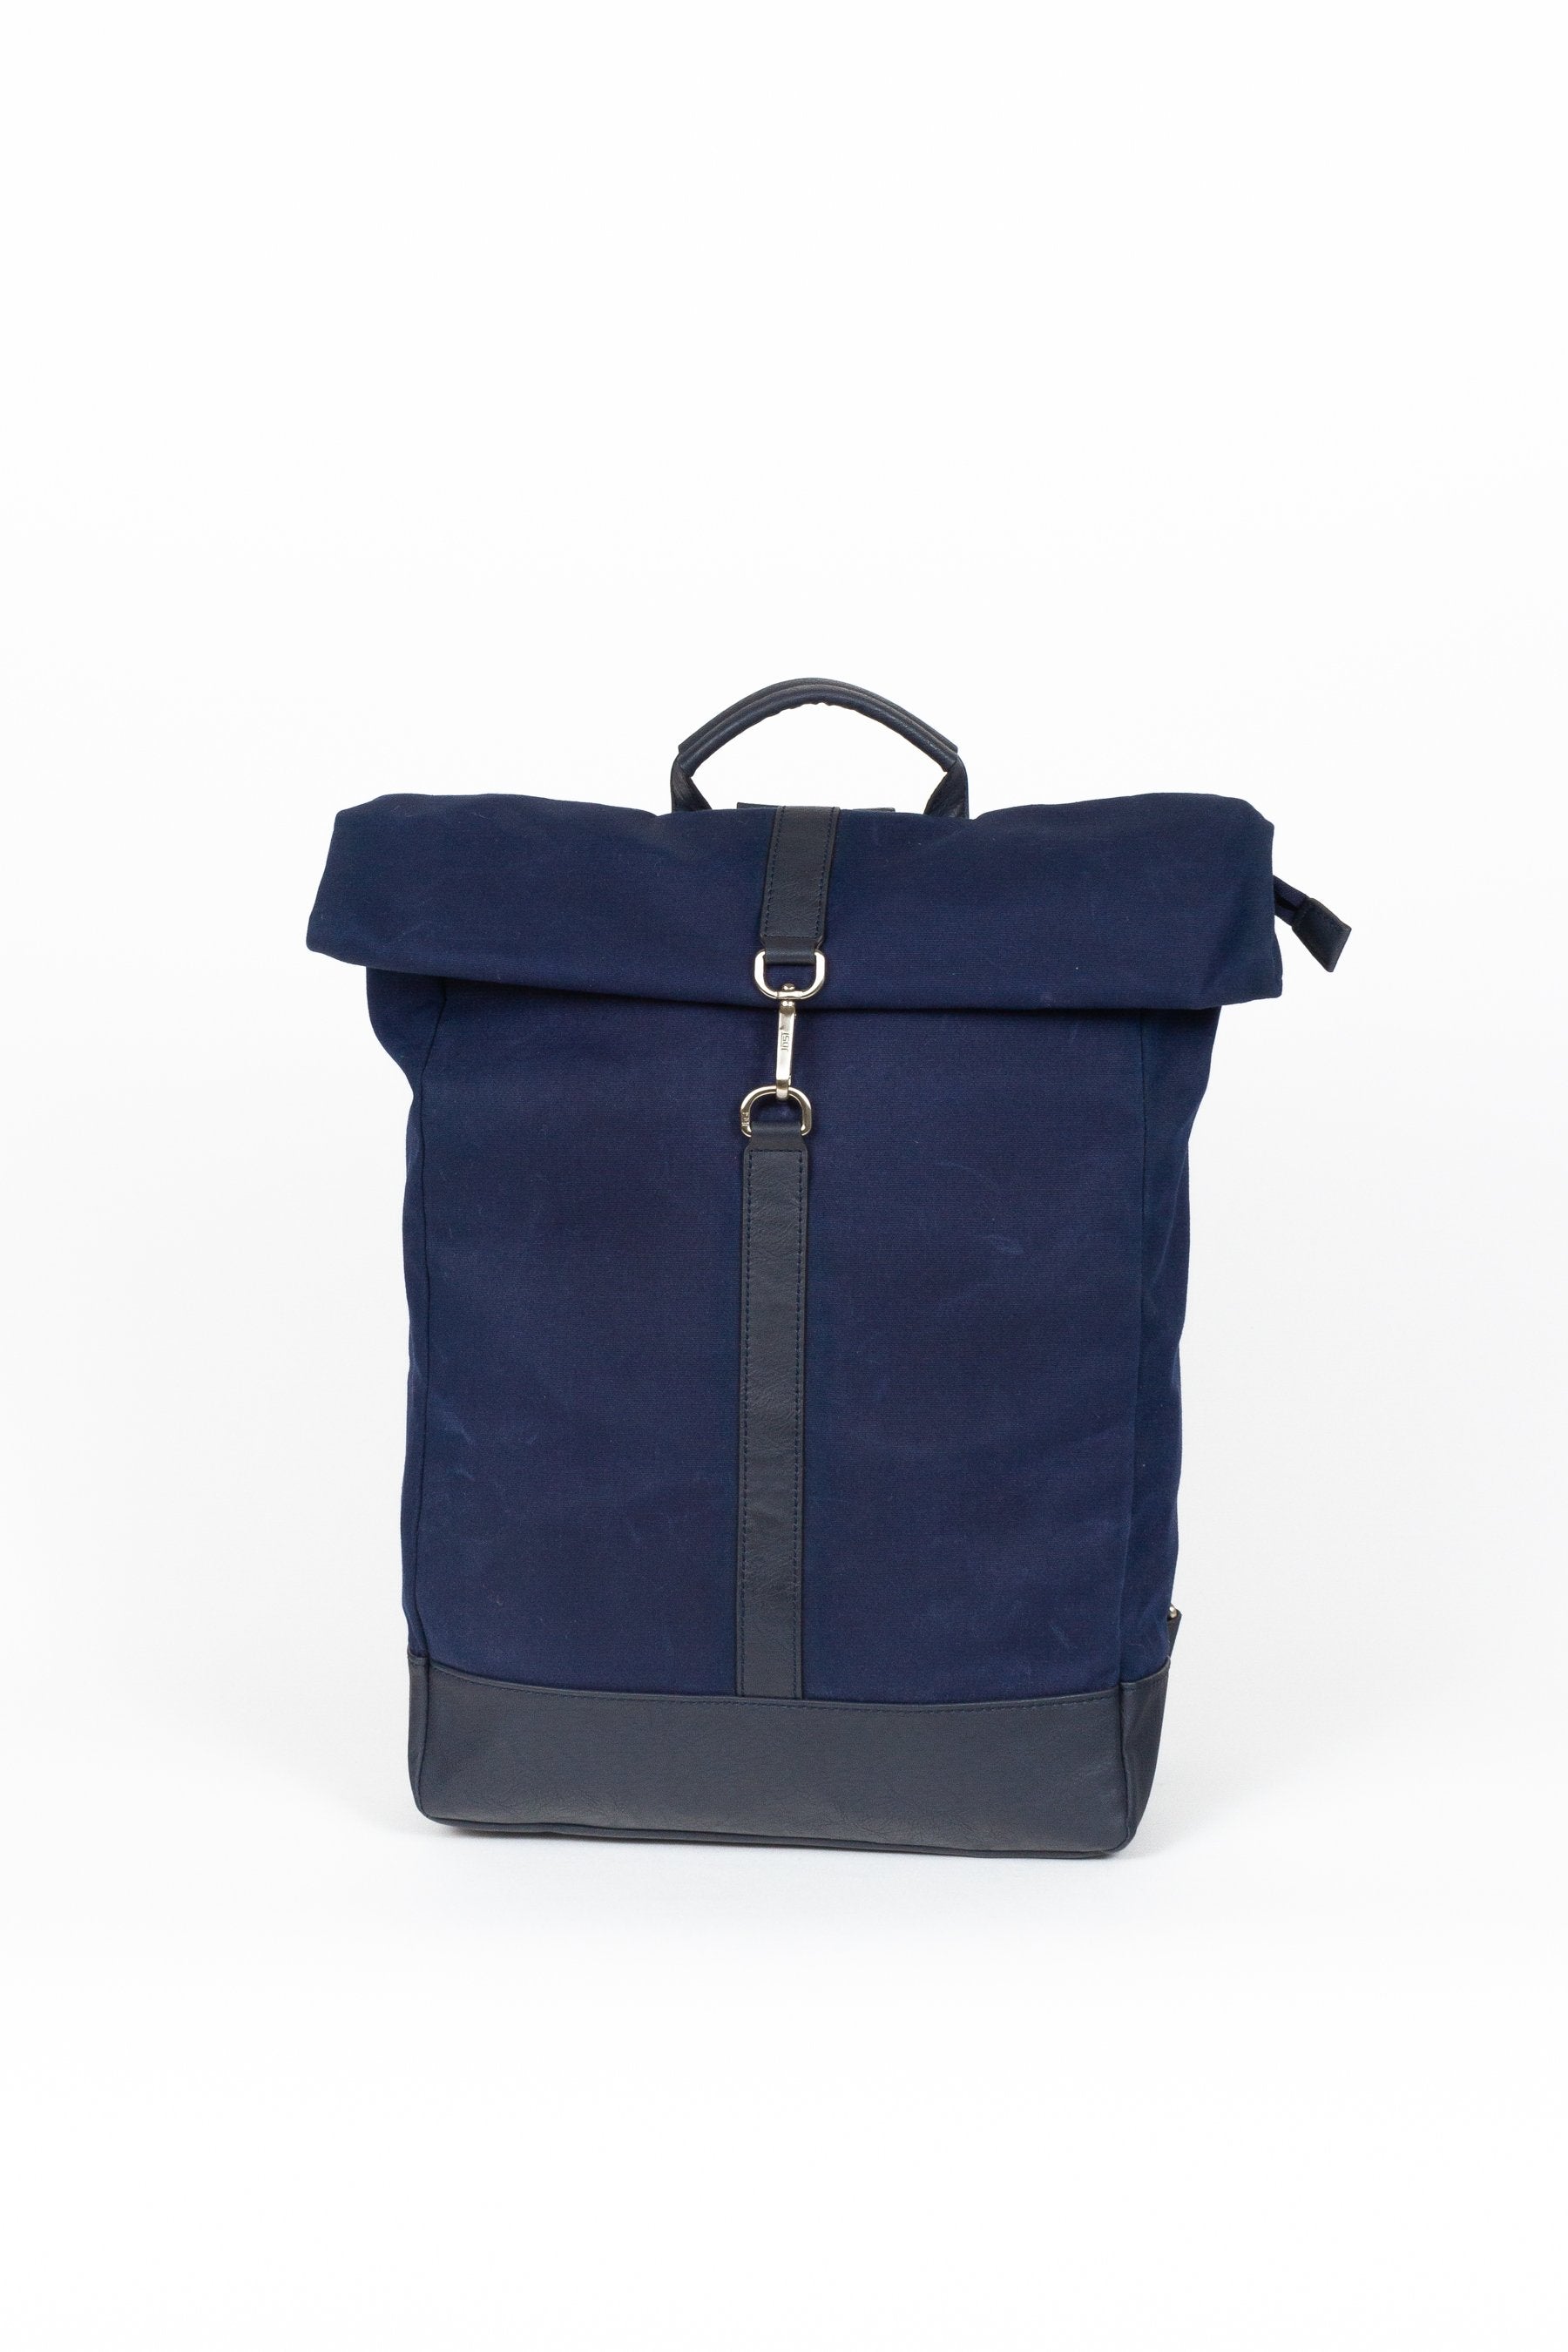 BEON.COM.AU Buy the Goteborg Roll Top Backpack in Navy by Jost Bags Jost at BEON.COM.AU